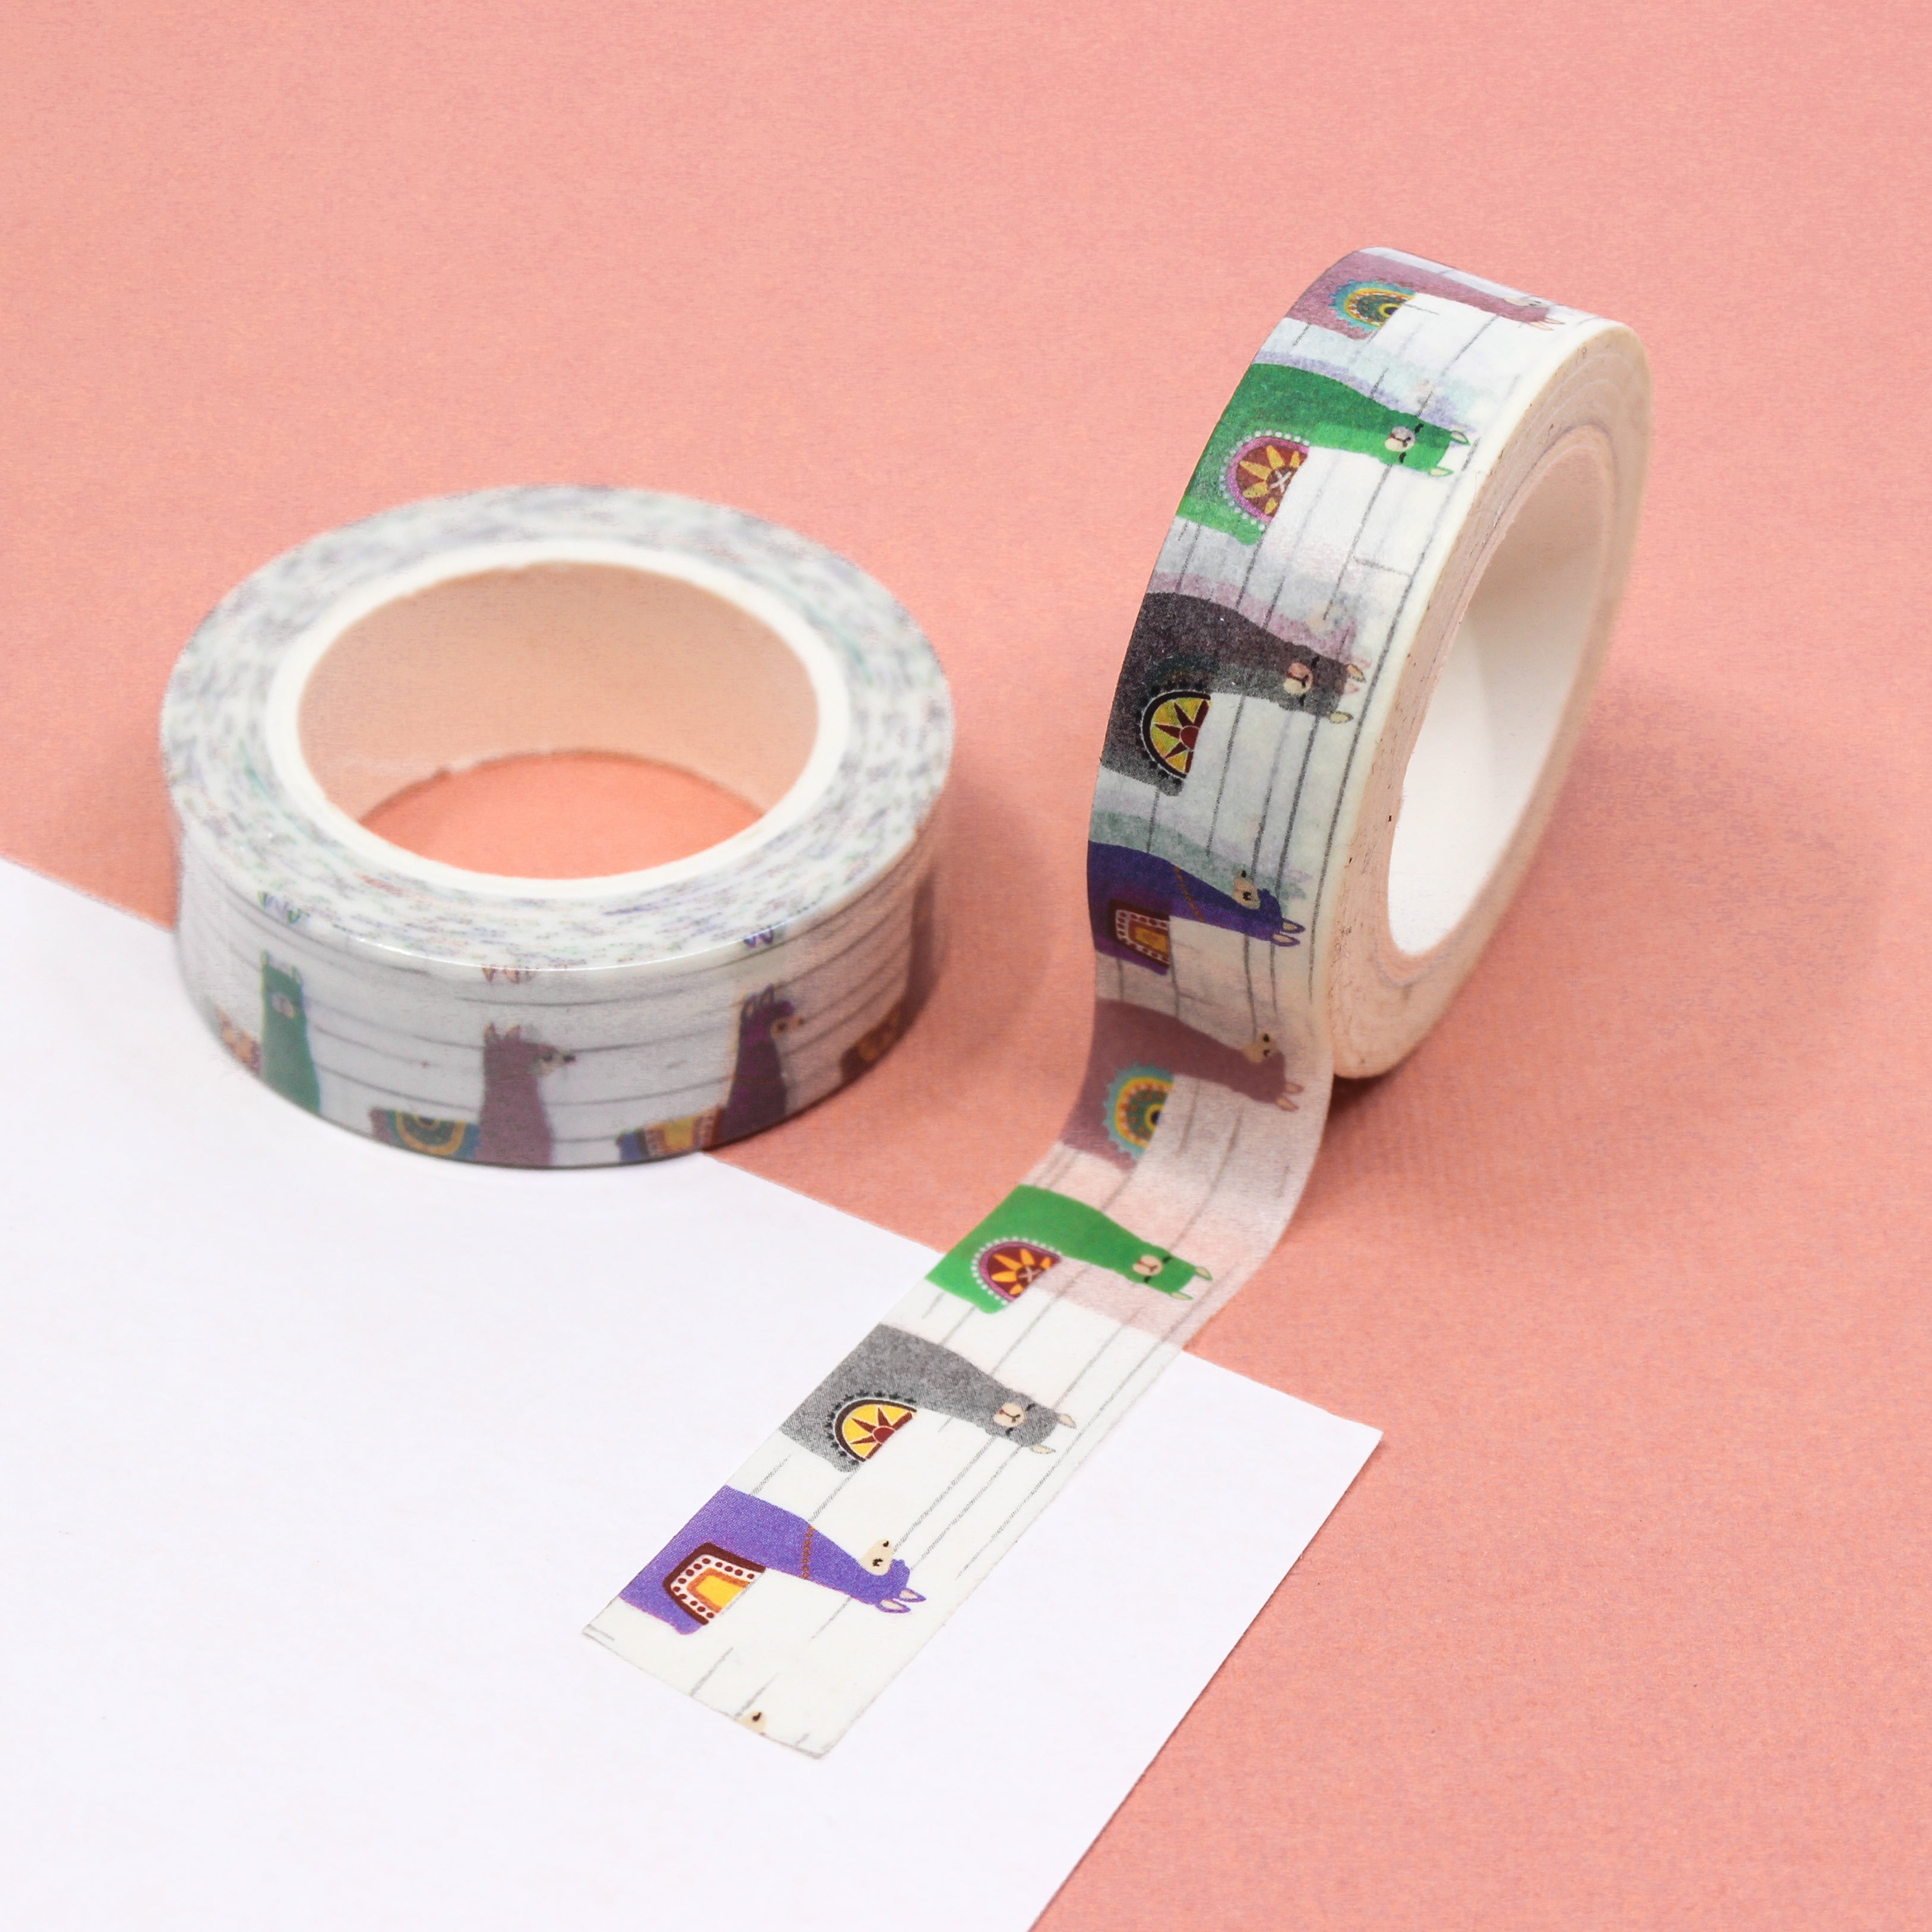 Brighten up your crafts with our Cute Colorful Llama Washi Tape, adorned with adorable llama illustrations. Perfect for adding a playful and colorful touch to your projects. This tape is sold at BBB Supplies Craft Shop.